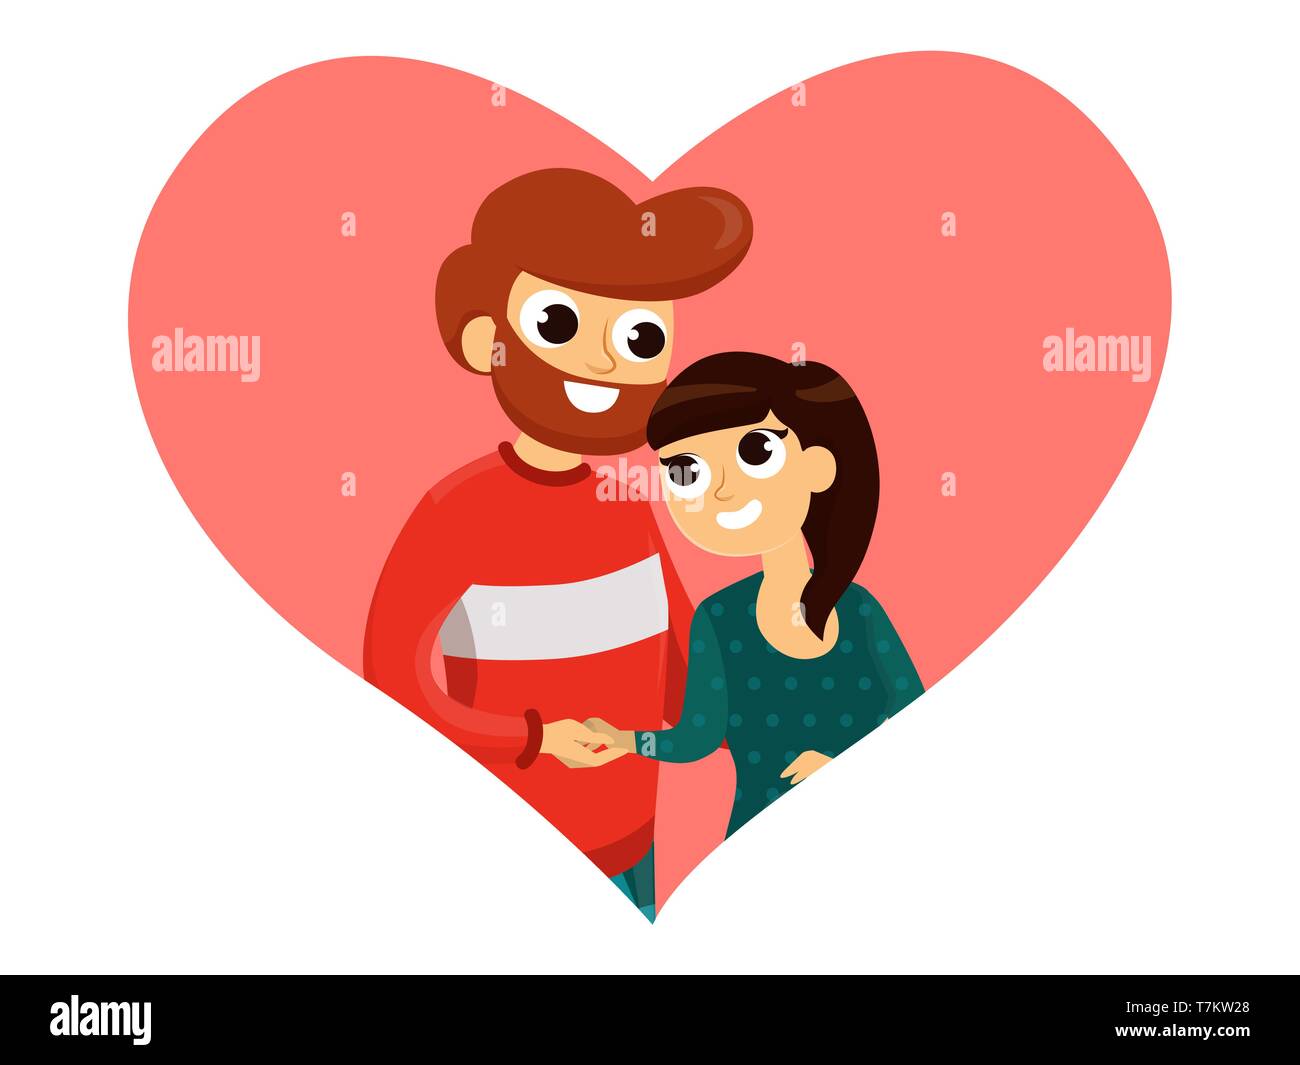 Smiling people holding hands and hugging, looking in each other in big red heart flat style vector illustration isolated on white background Stock Vector